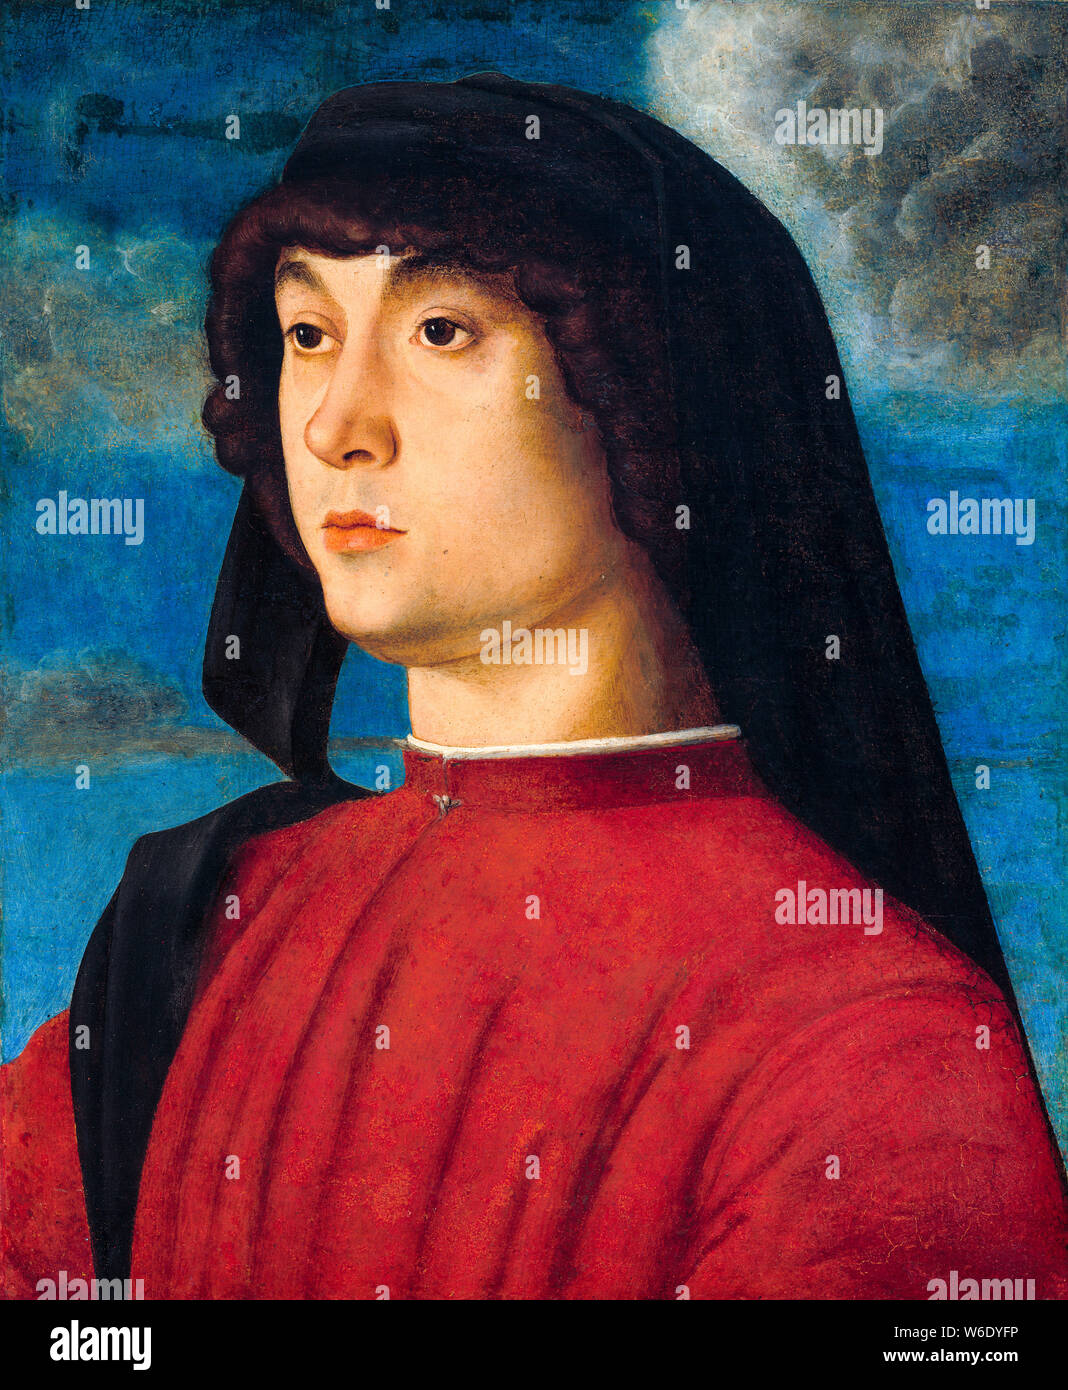 Giovanni Bellini, Portrait of a Young Man in Red, painting, circa 1480 Stock Photo